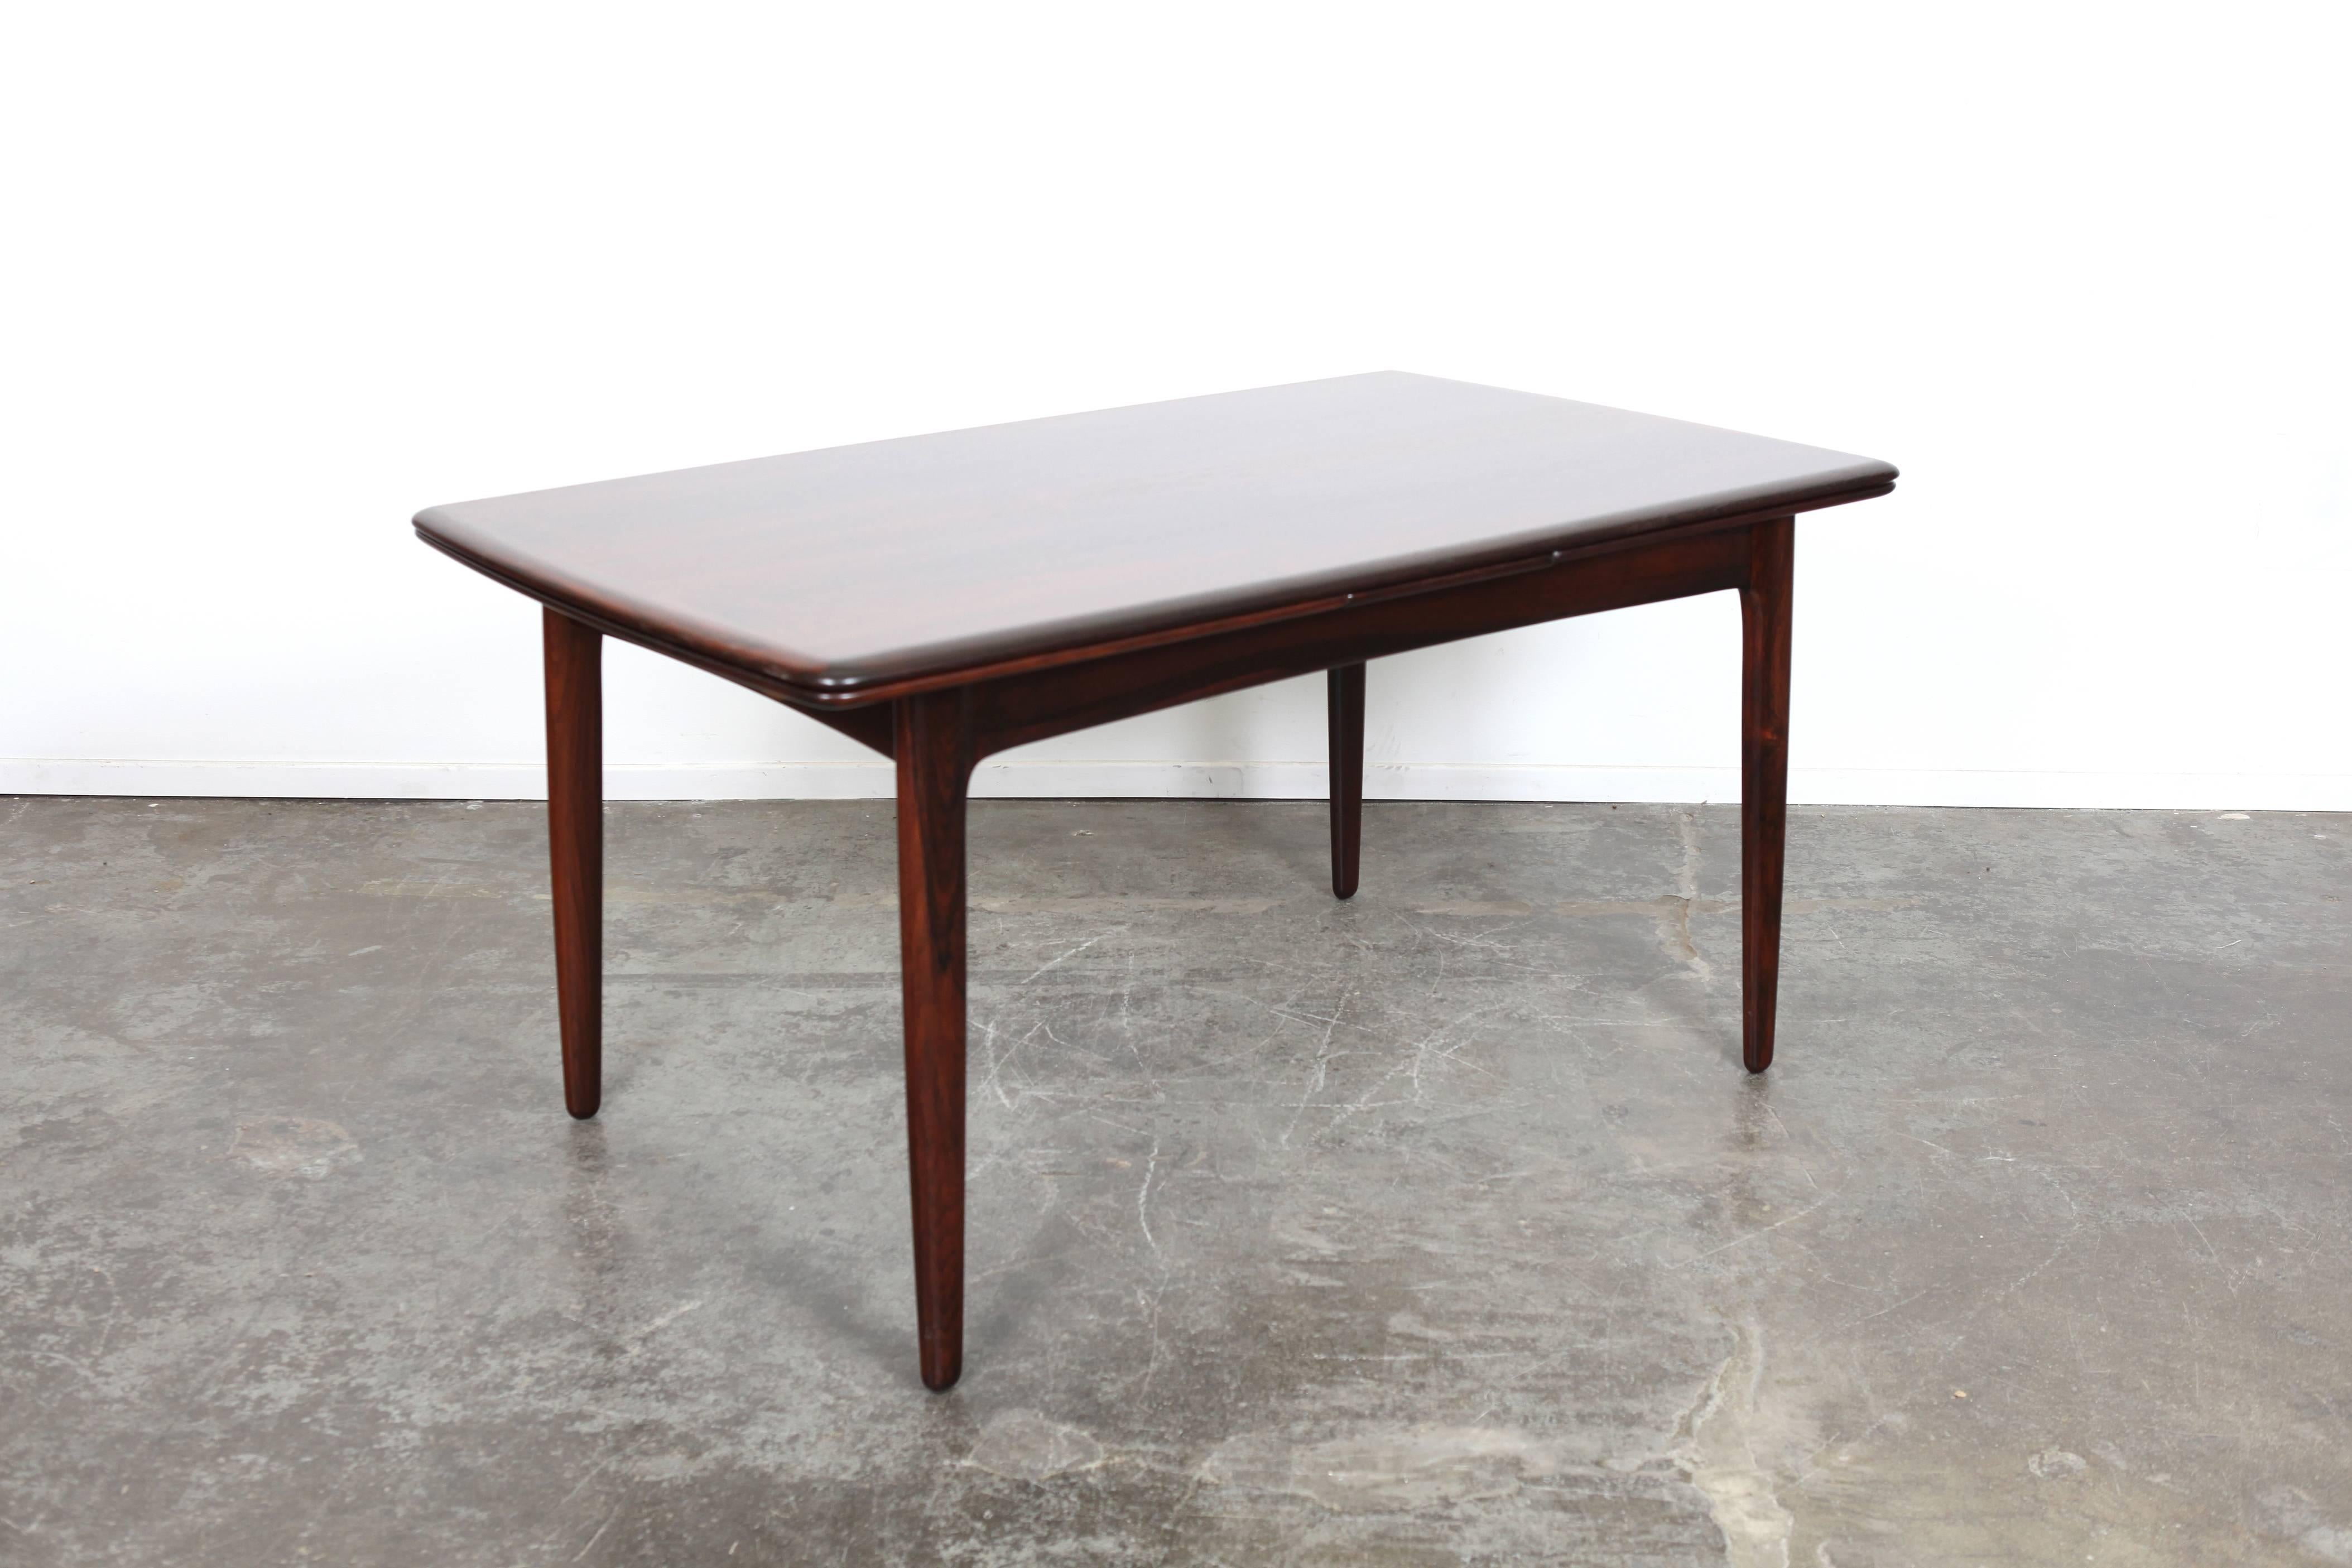 An elegant rosewood extendable dining table by Svend Åge Madsen for K. Knudsen. Featuring a beautiful grain pattern, solid rosewood legs and banding along with curved edge detailing giving it an overall organic aesthetic. The extended width is 101